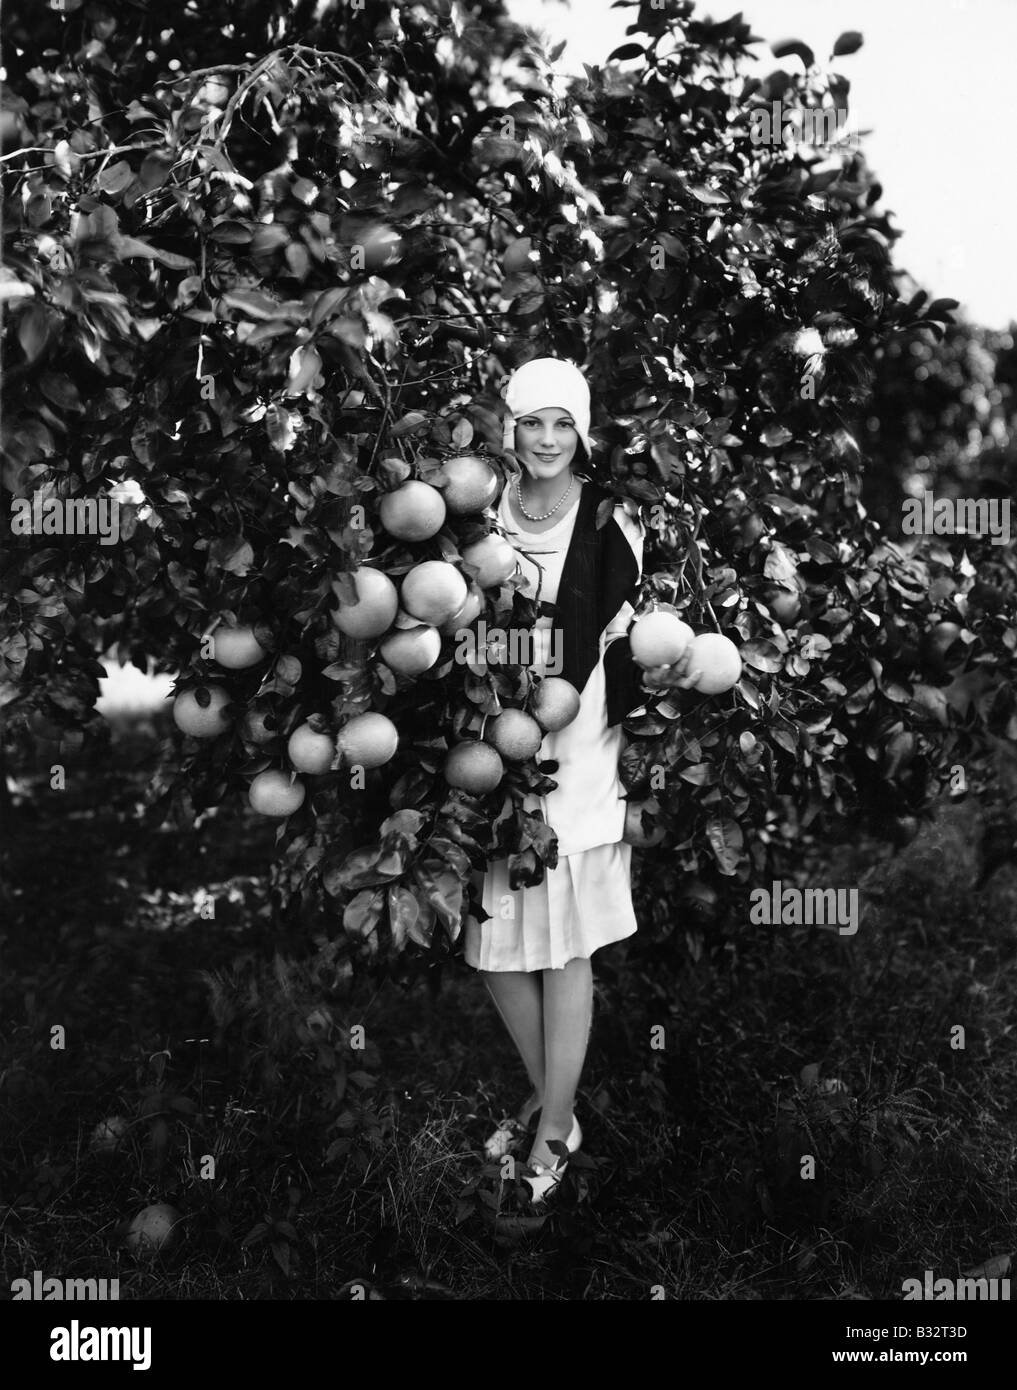 Portrait of a young woman holding grapefruits and standing in an orchard Stock Photo